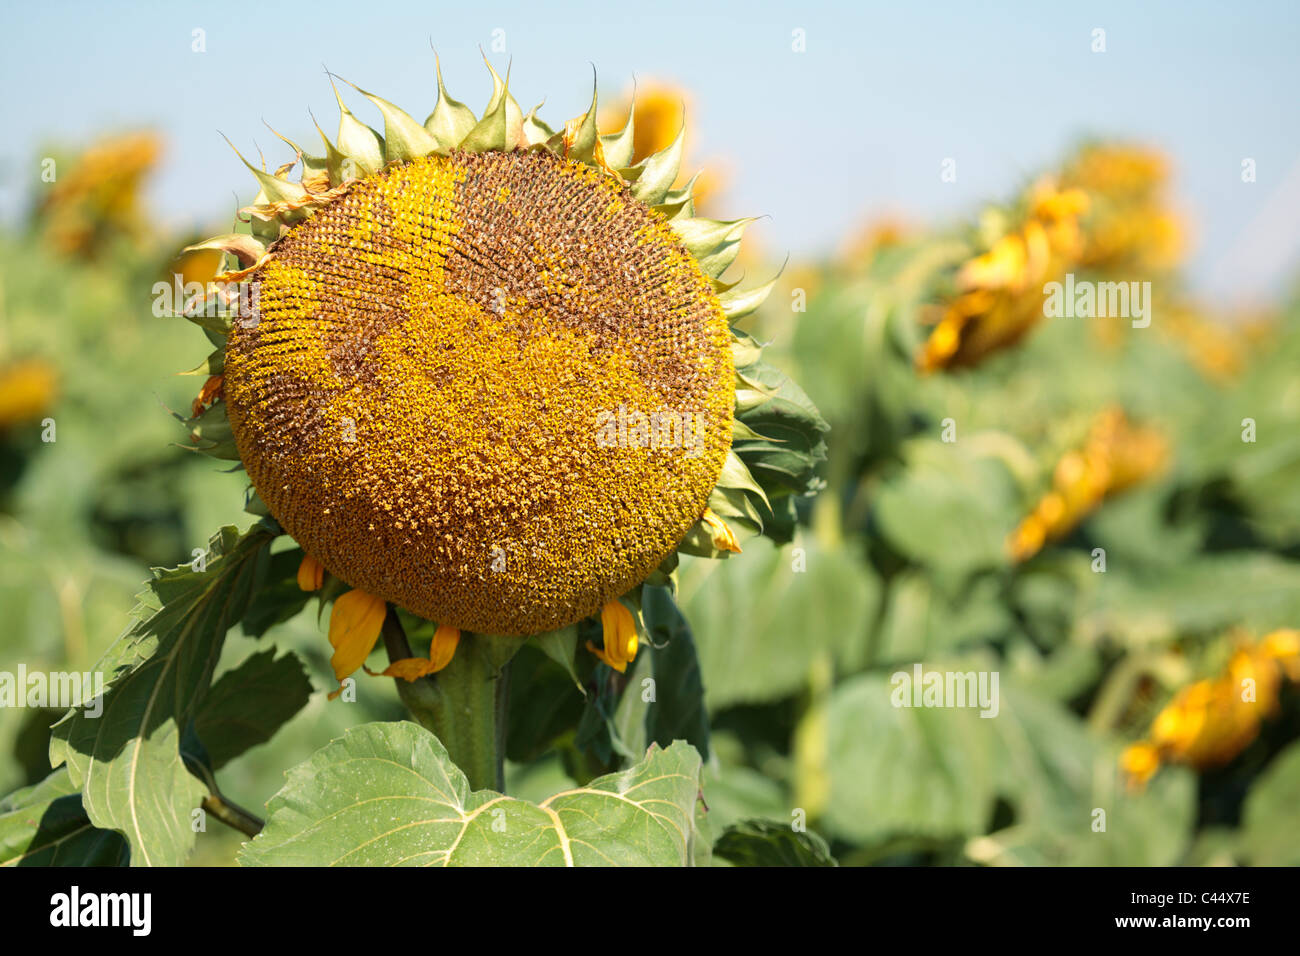 Wilting Sunflower Crop, Free State, South Africa Stock Photo